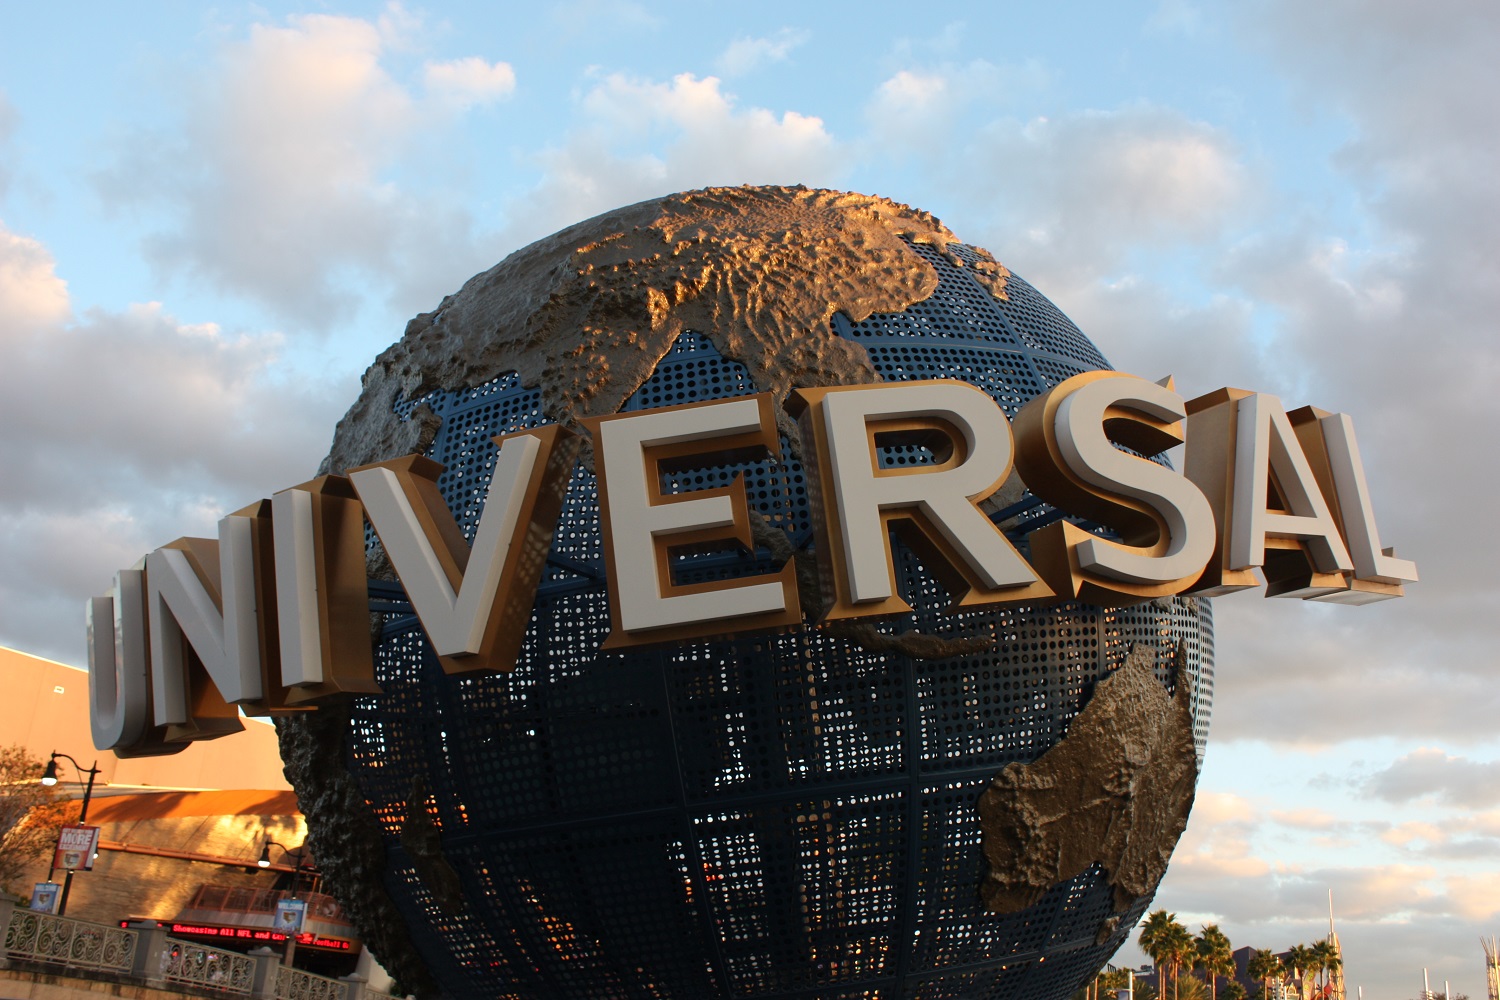 Parking, guest drop-off, and the Universal Orlando transportation hub